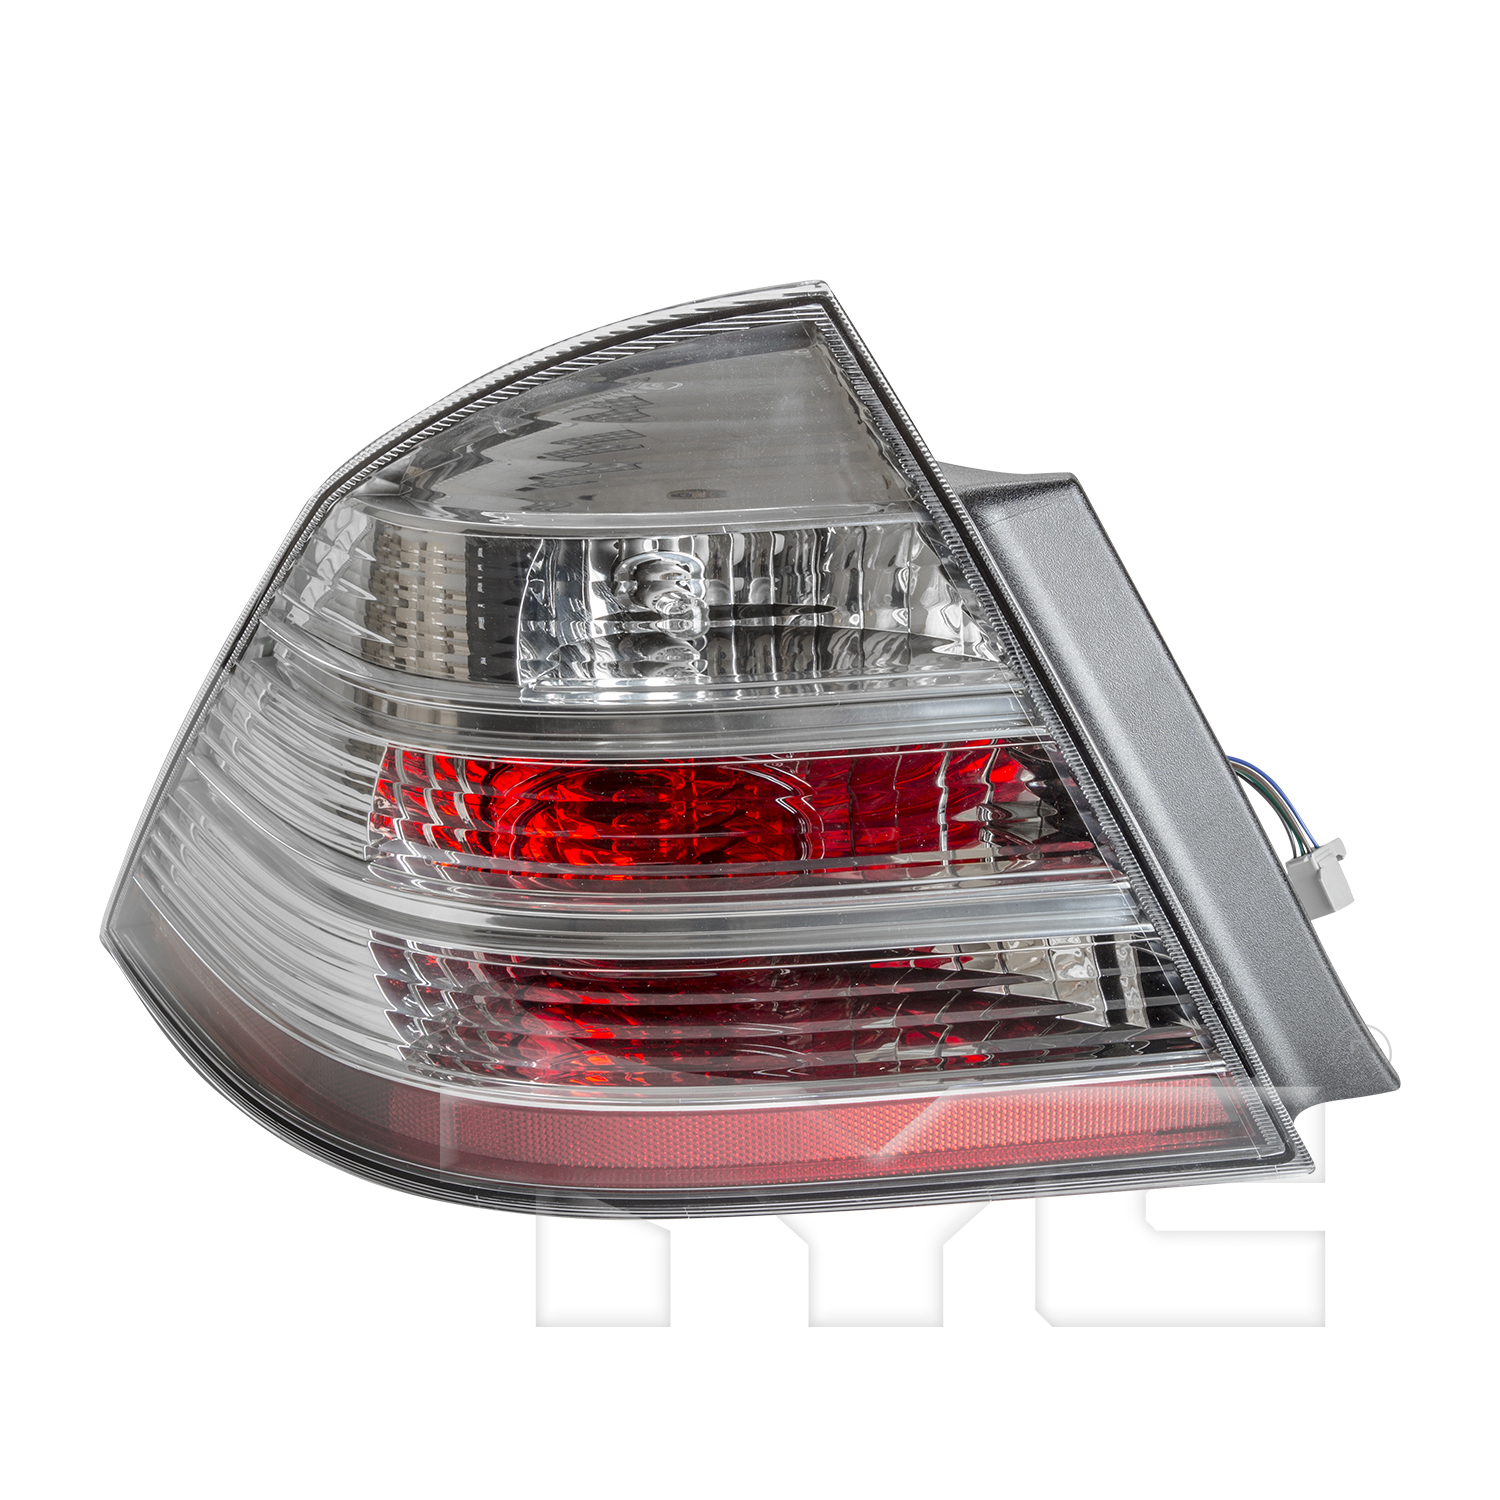 Aftermarket TAILLIGHTS for FORD - TAURUS, TAURUS,08-09,LT Taillamp lens/housing